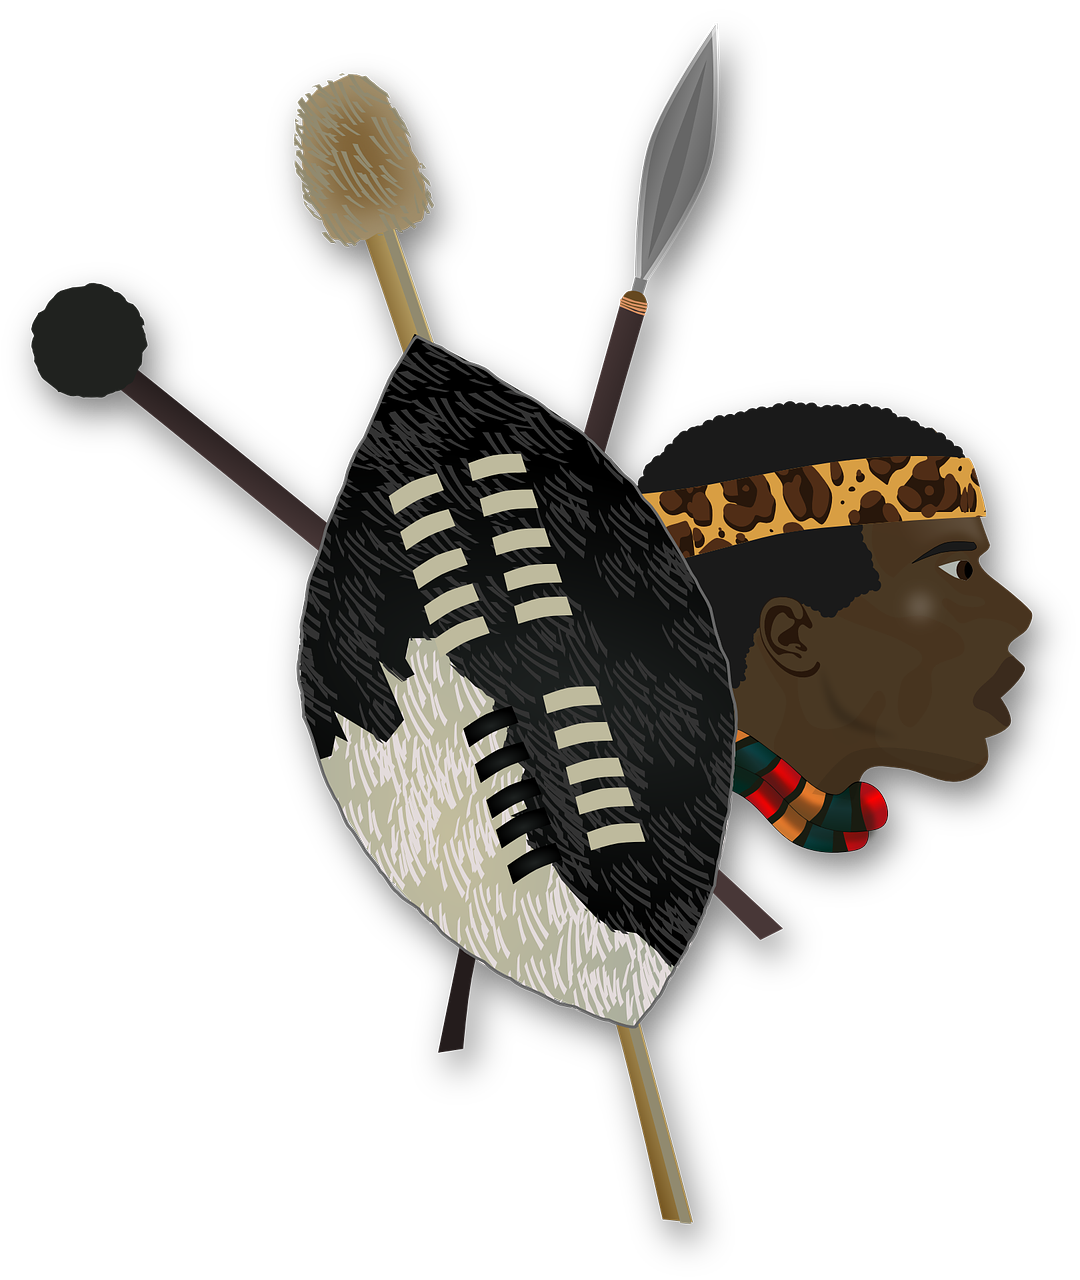 folklore shield africa free photo